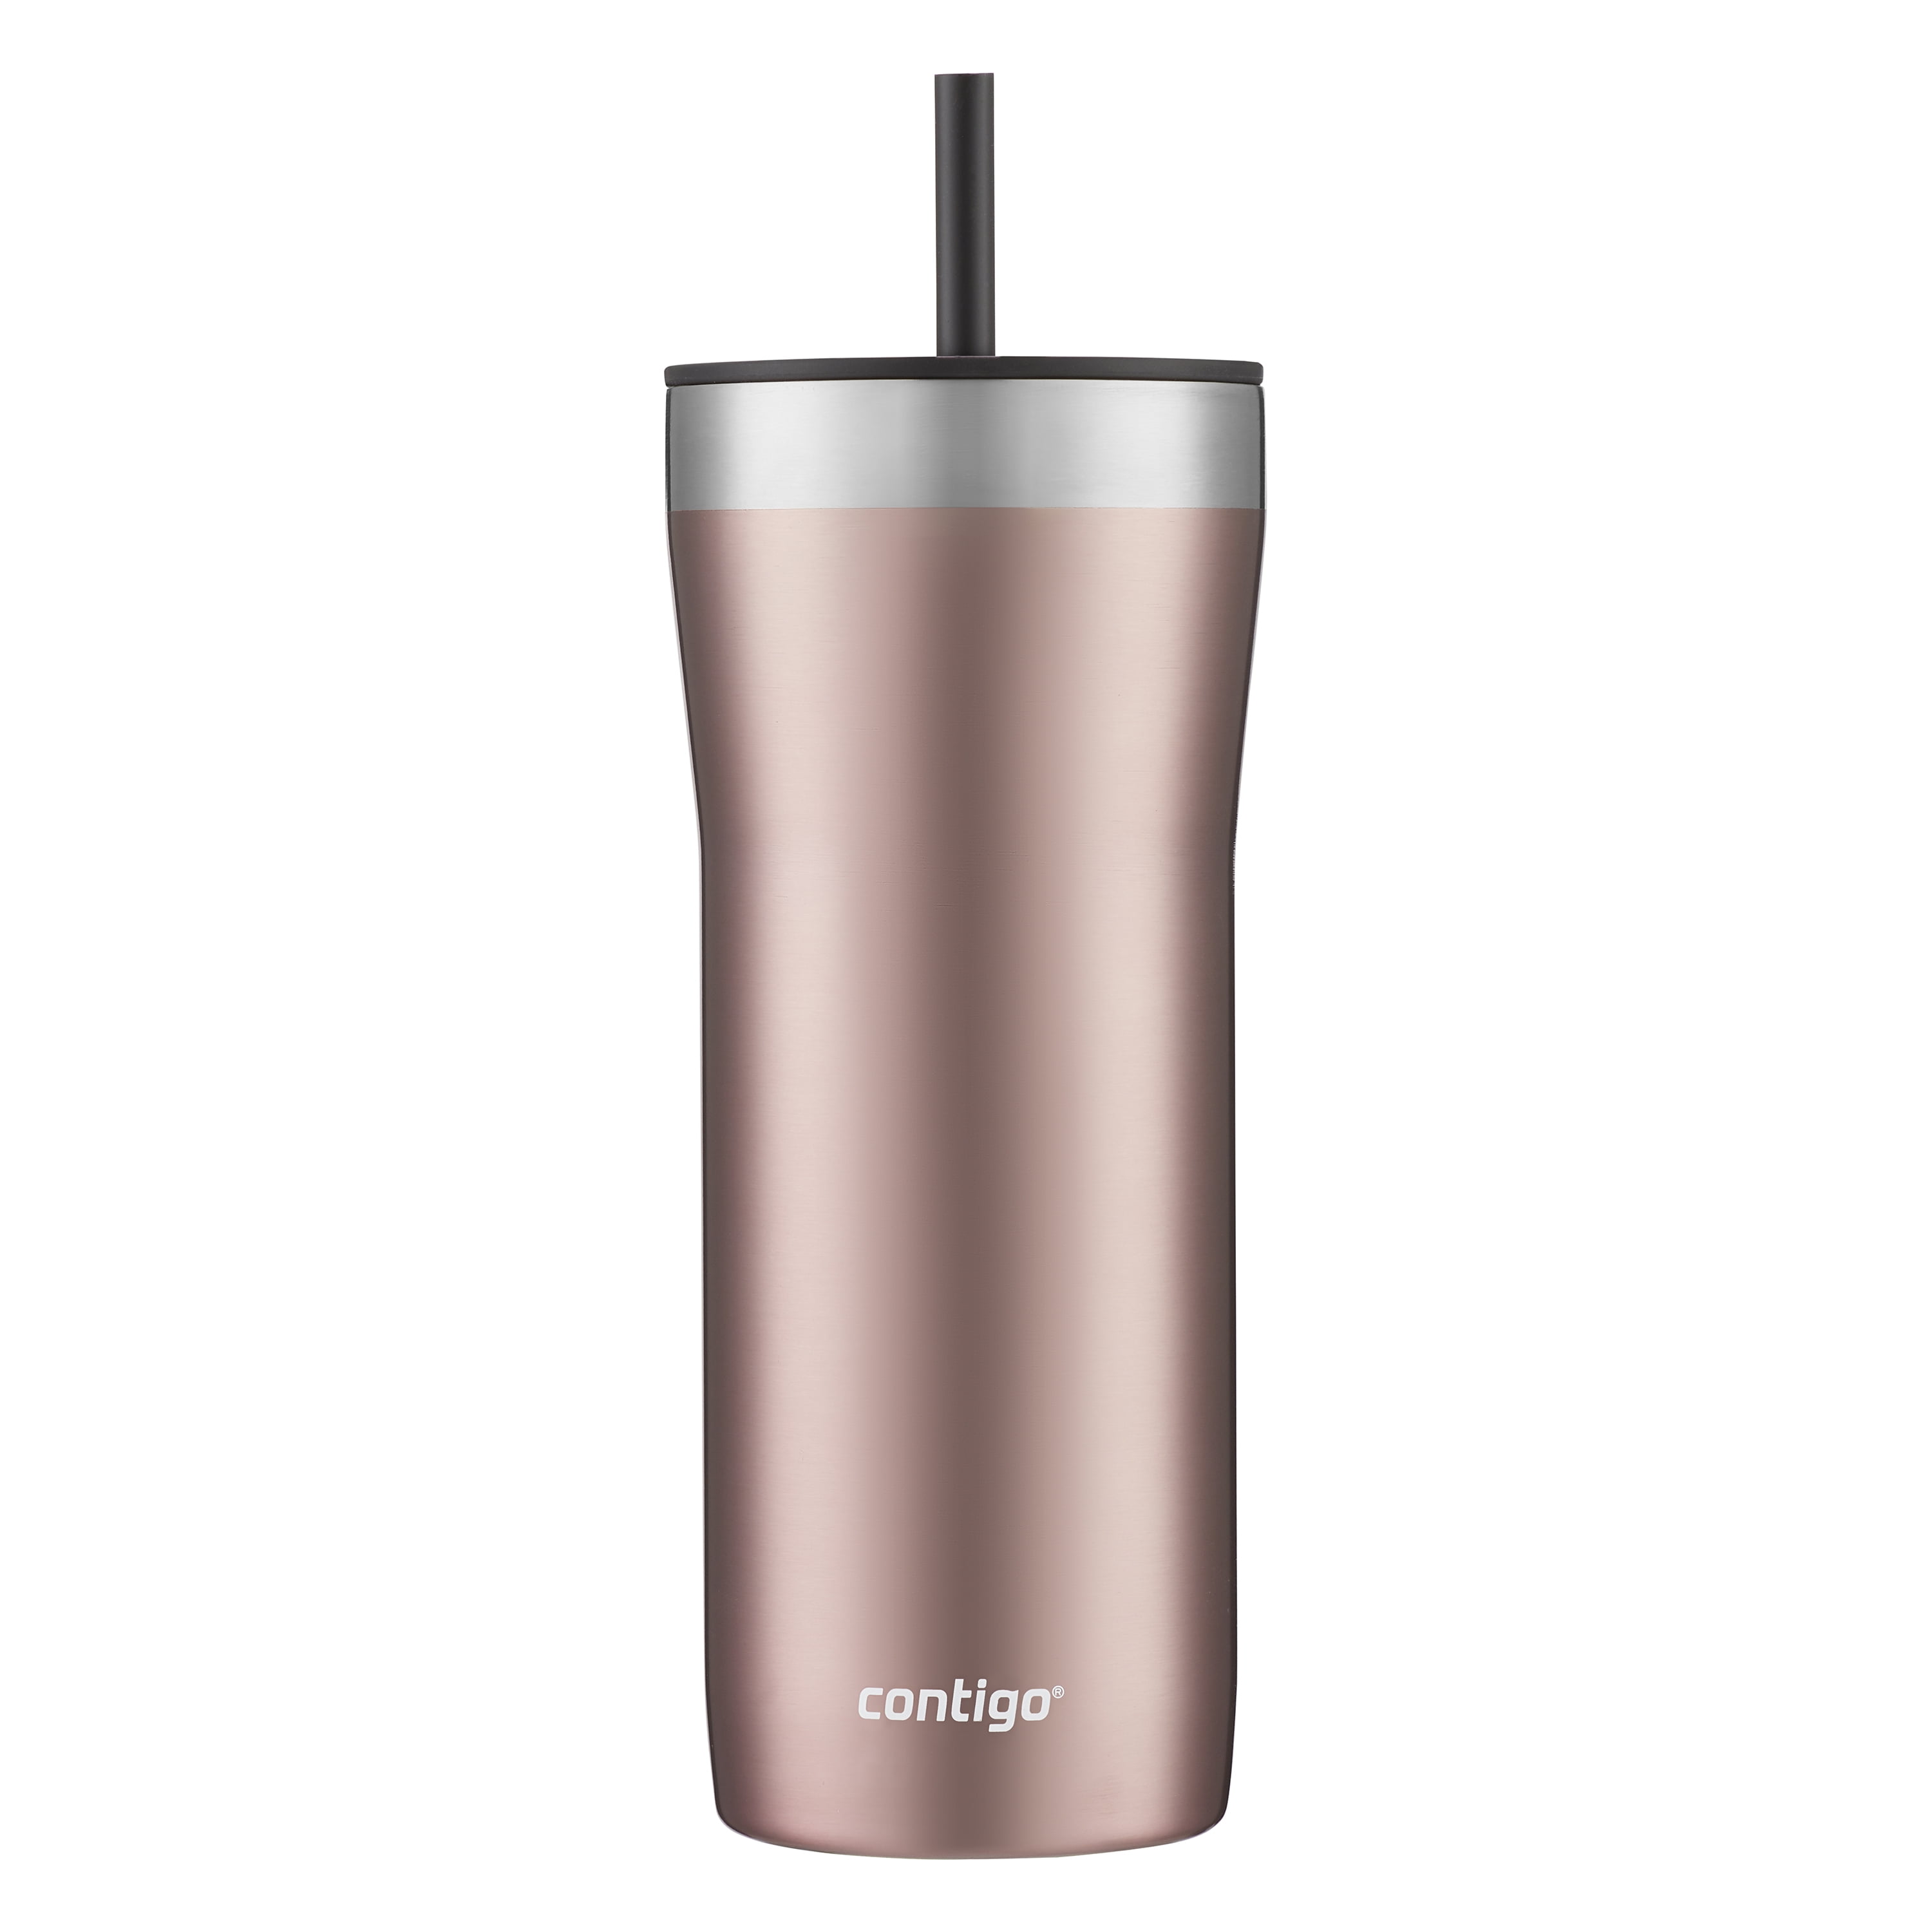 Contigo Uptown Dual-Sip Stainless Steel Tumbler with Straw in Pink, 18 fl  oz.